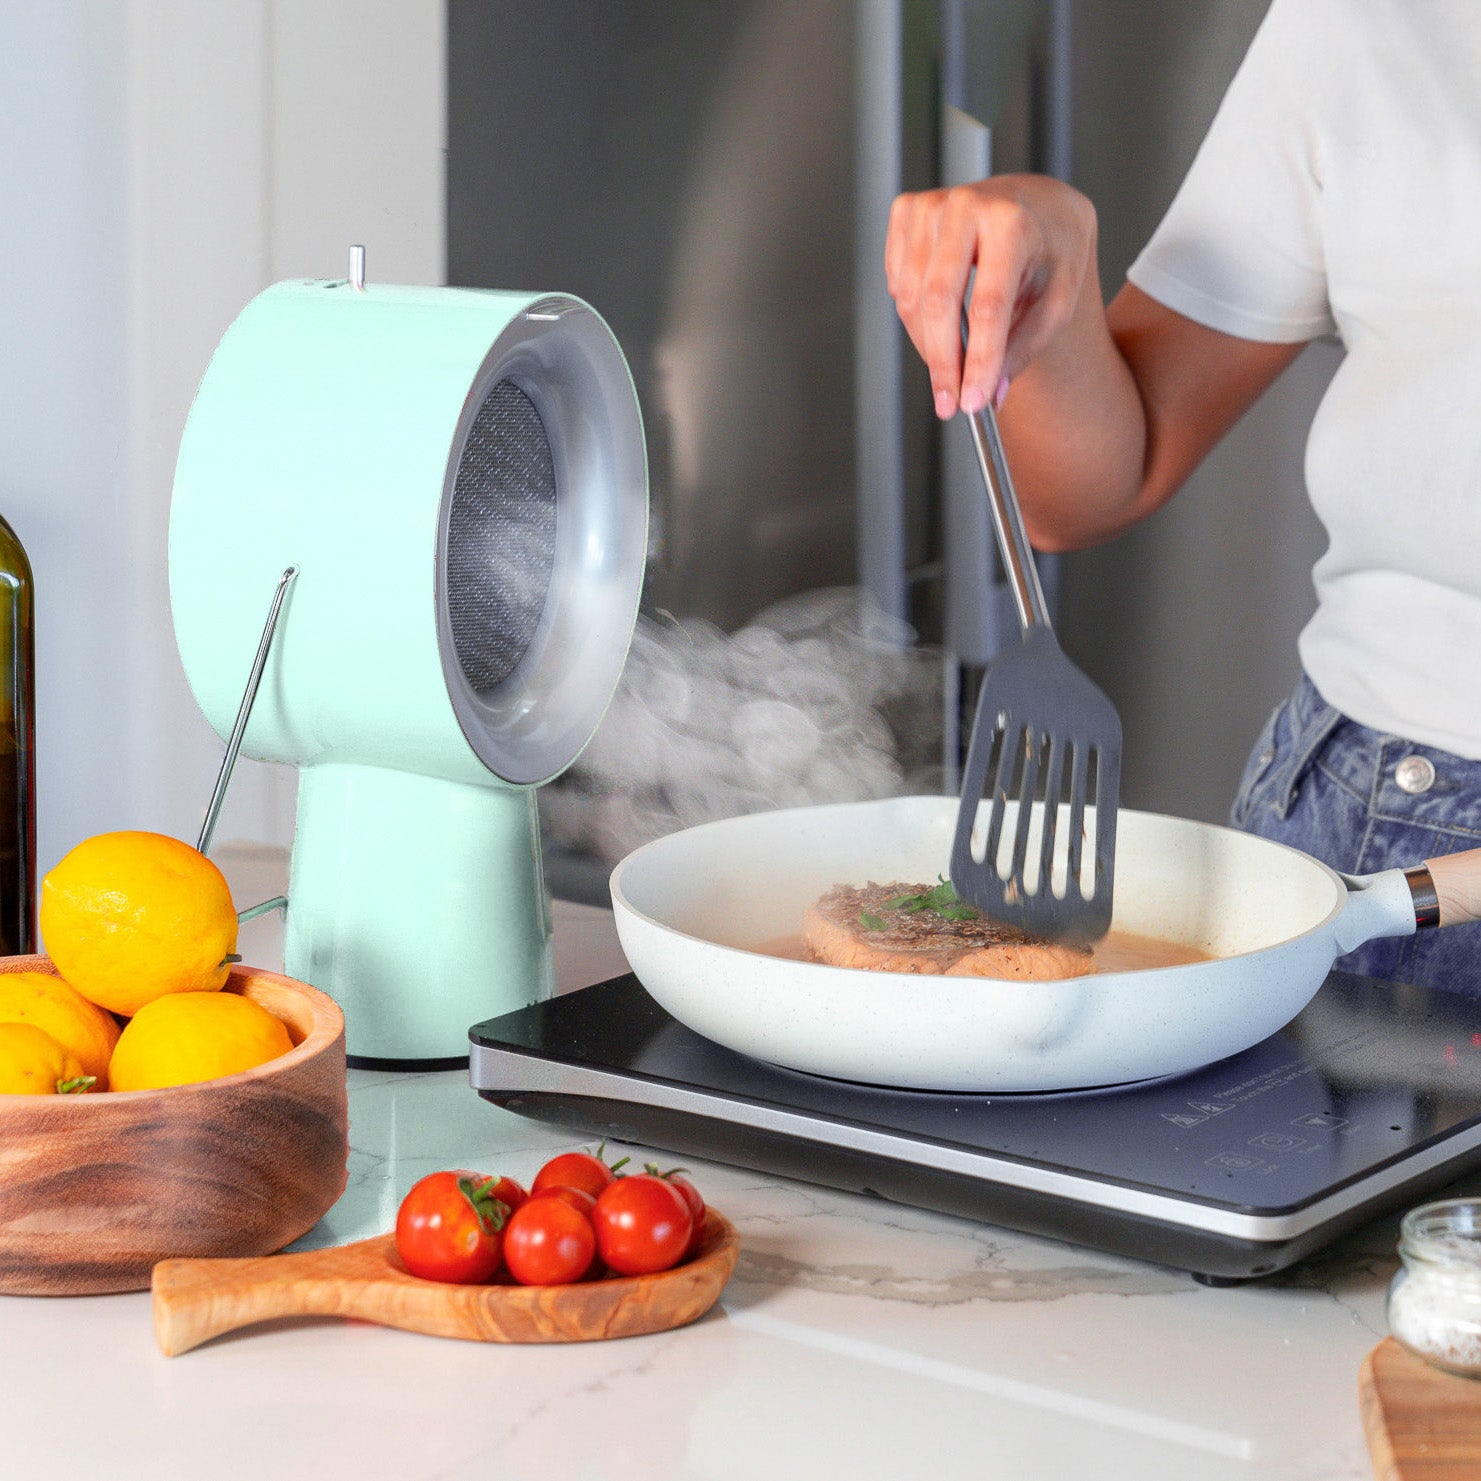 AirHood® Wireless | The World's First Portable Kitchen Air Cleaner  Mint Green